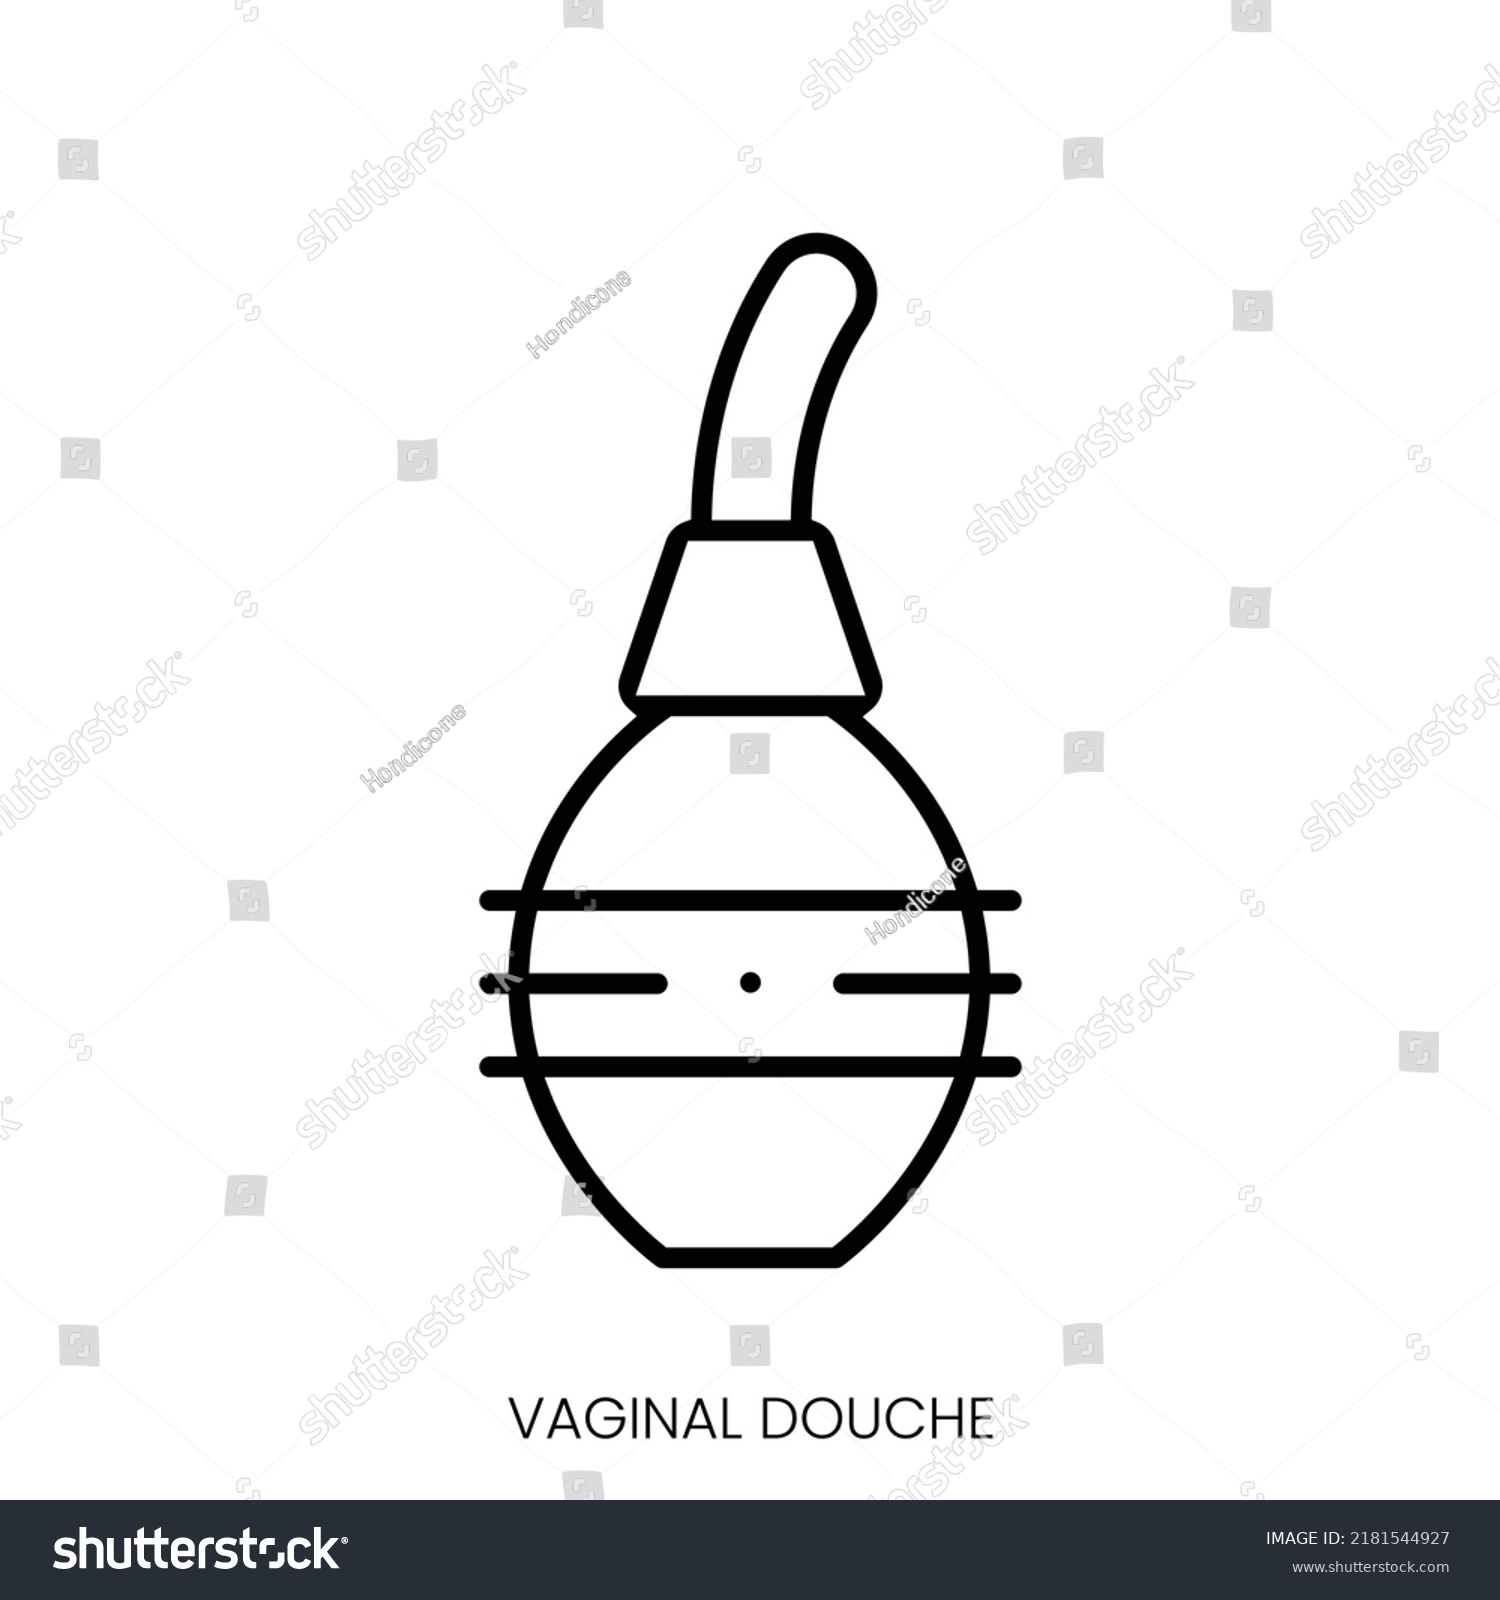 SVG of vaginal douche icon. Linear style sign isolated on white background. Vector illustration svg